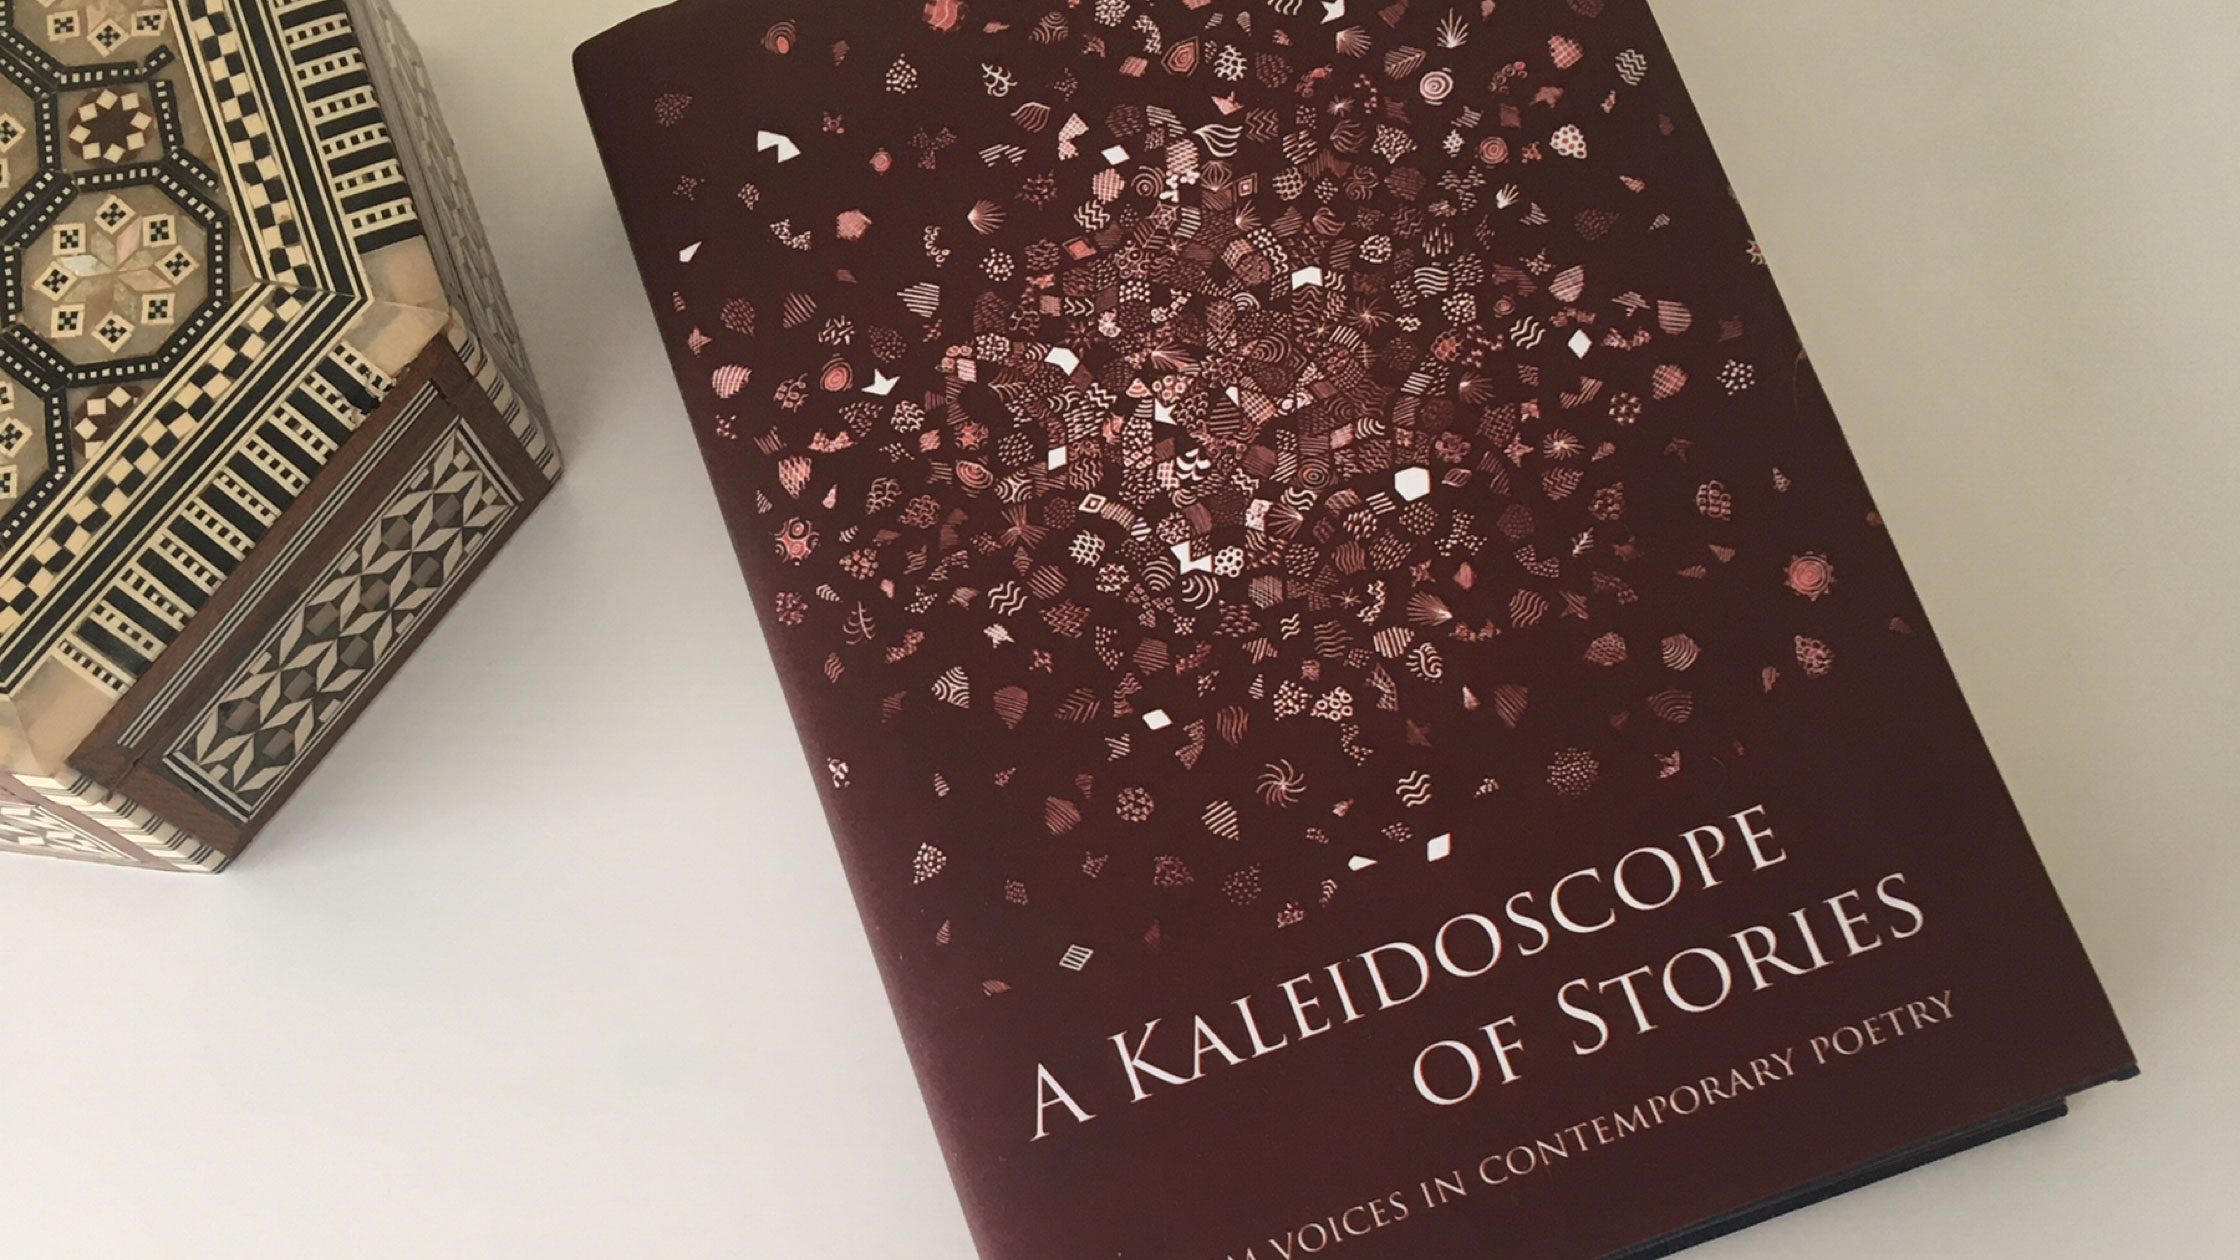 You are currently viewing A Kaleidoscope of Stories, Muslim Voices in Contemporary Poetry – Book Review by Humera Khan, An-Nisa Society